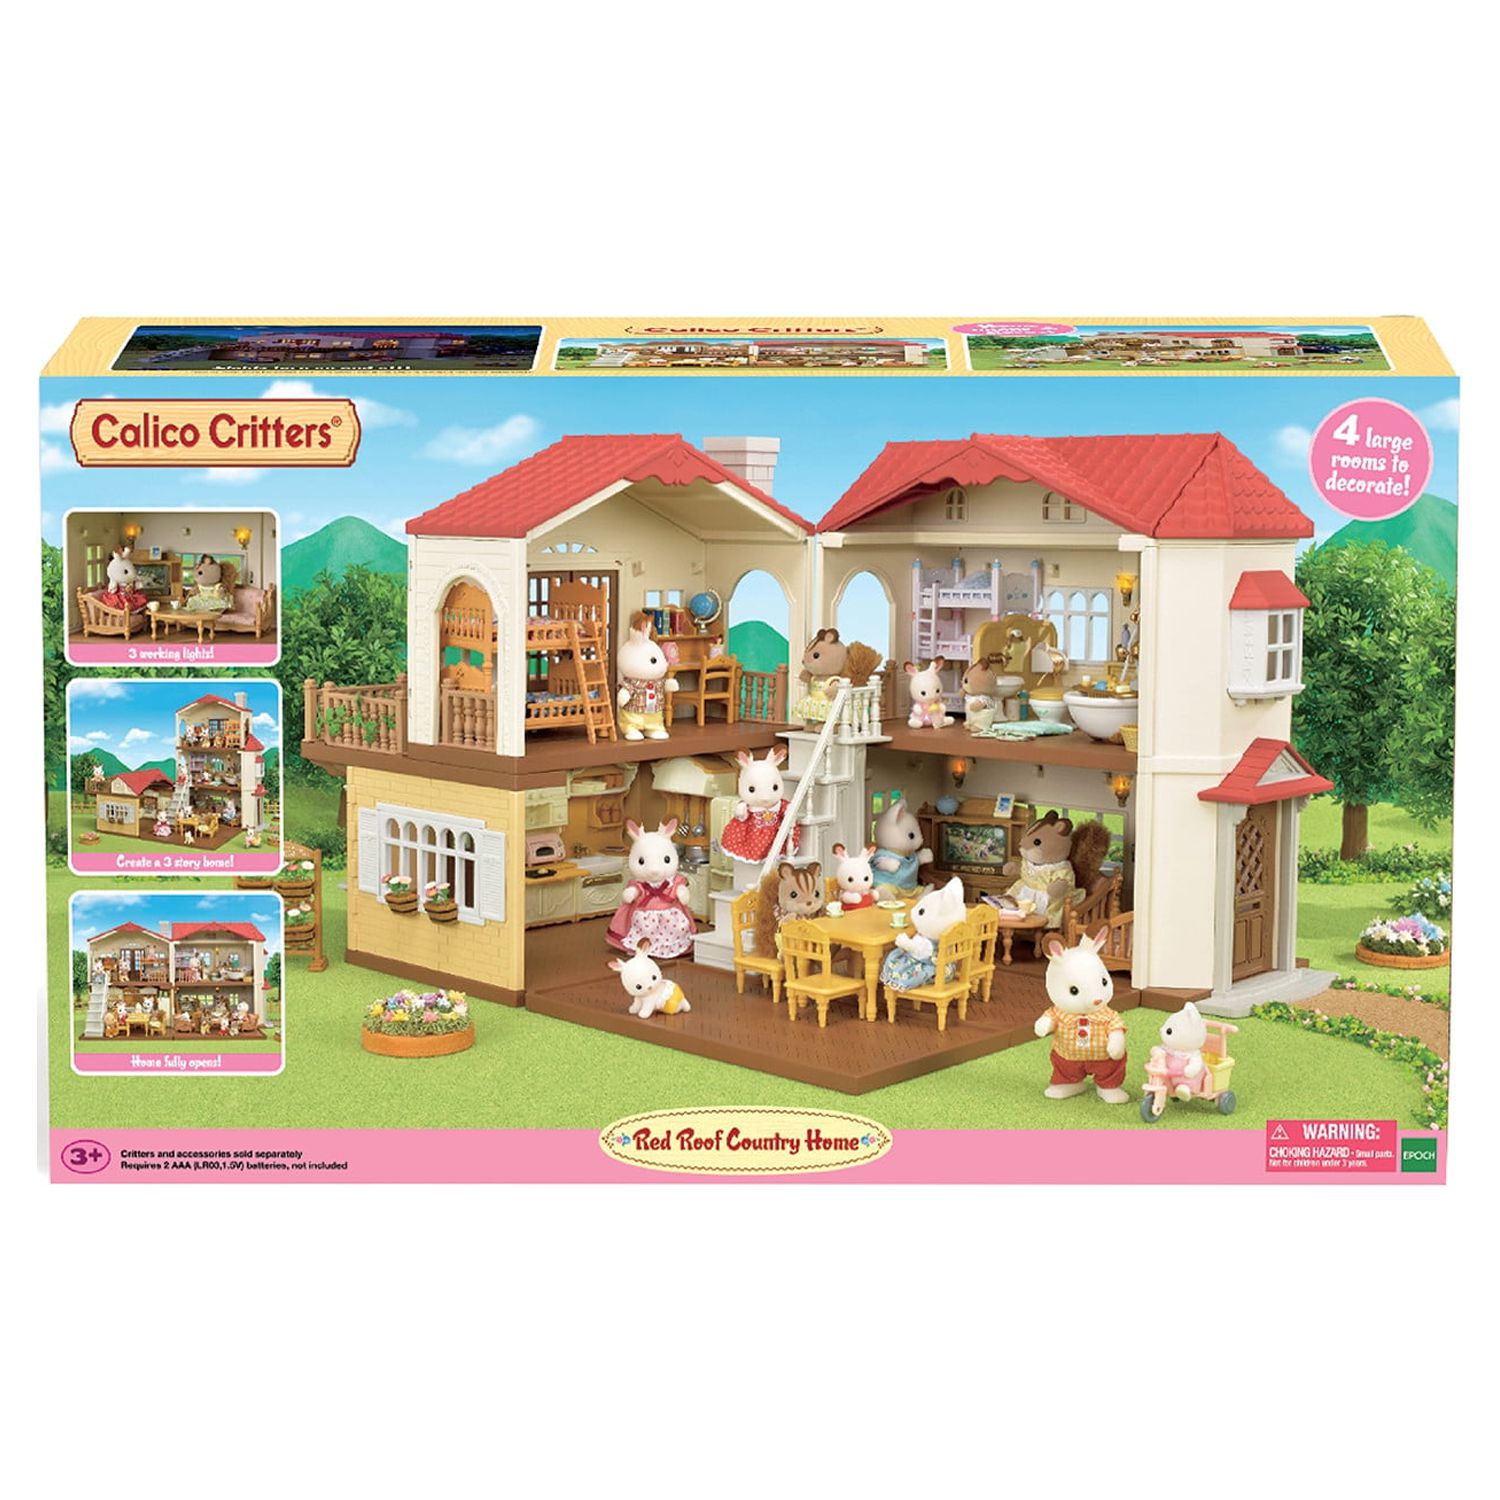 Calico Critters Red Roof Country Home, Dollhouse Playset - image 5 of 5